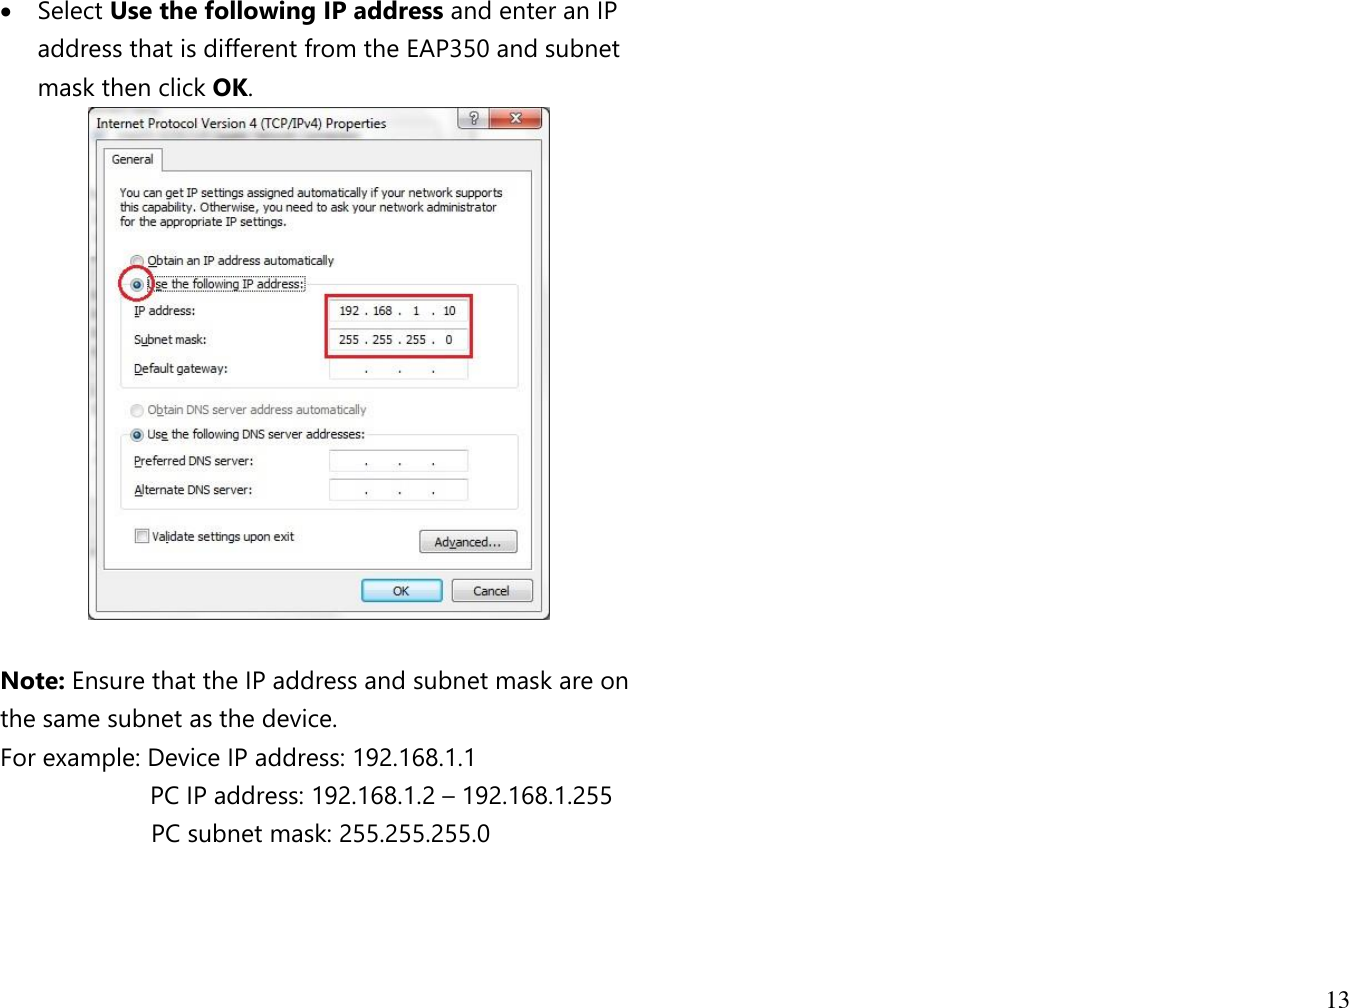 13   Select Use the following IP address and enter an IP address that is different from the EAP350 and subnet mask then click OK.   Note: Ensure that the IP address and subnet mask are on the same subnet as the device.   For example: Device IP address: 192.168.1.1 PC IP address: 192.168.1.2 – 192.168.1.255   PC subnet mask: 255.255.255.0     